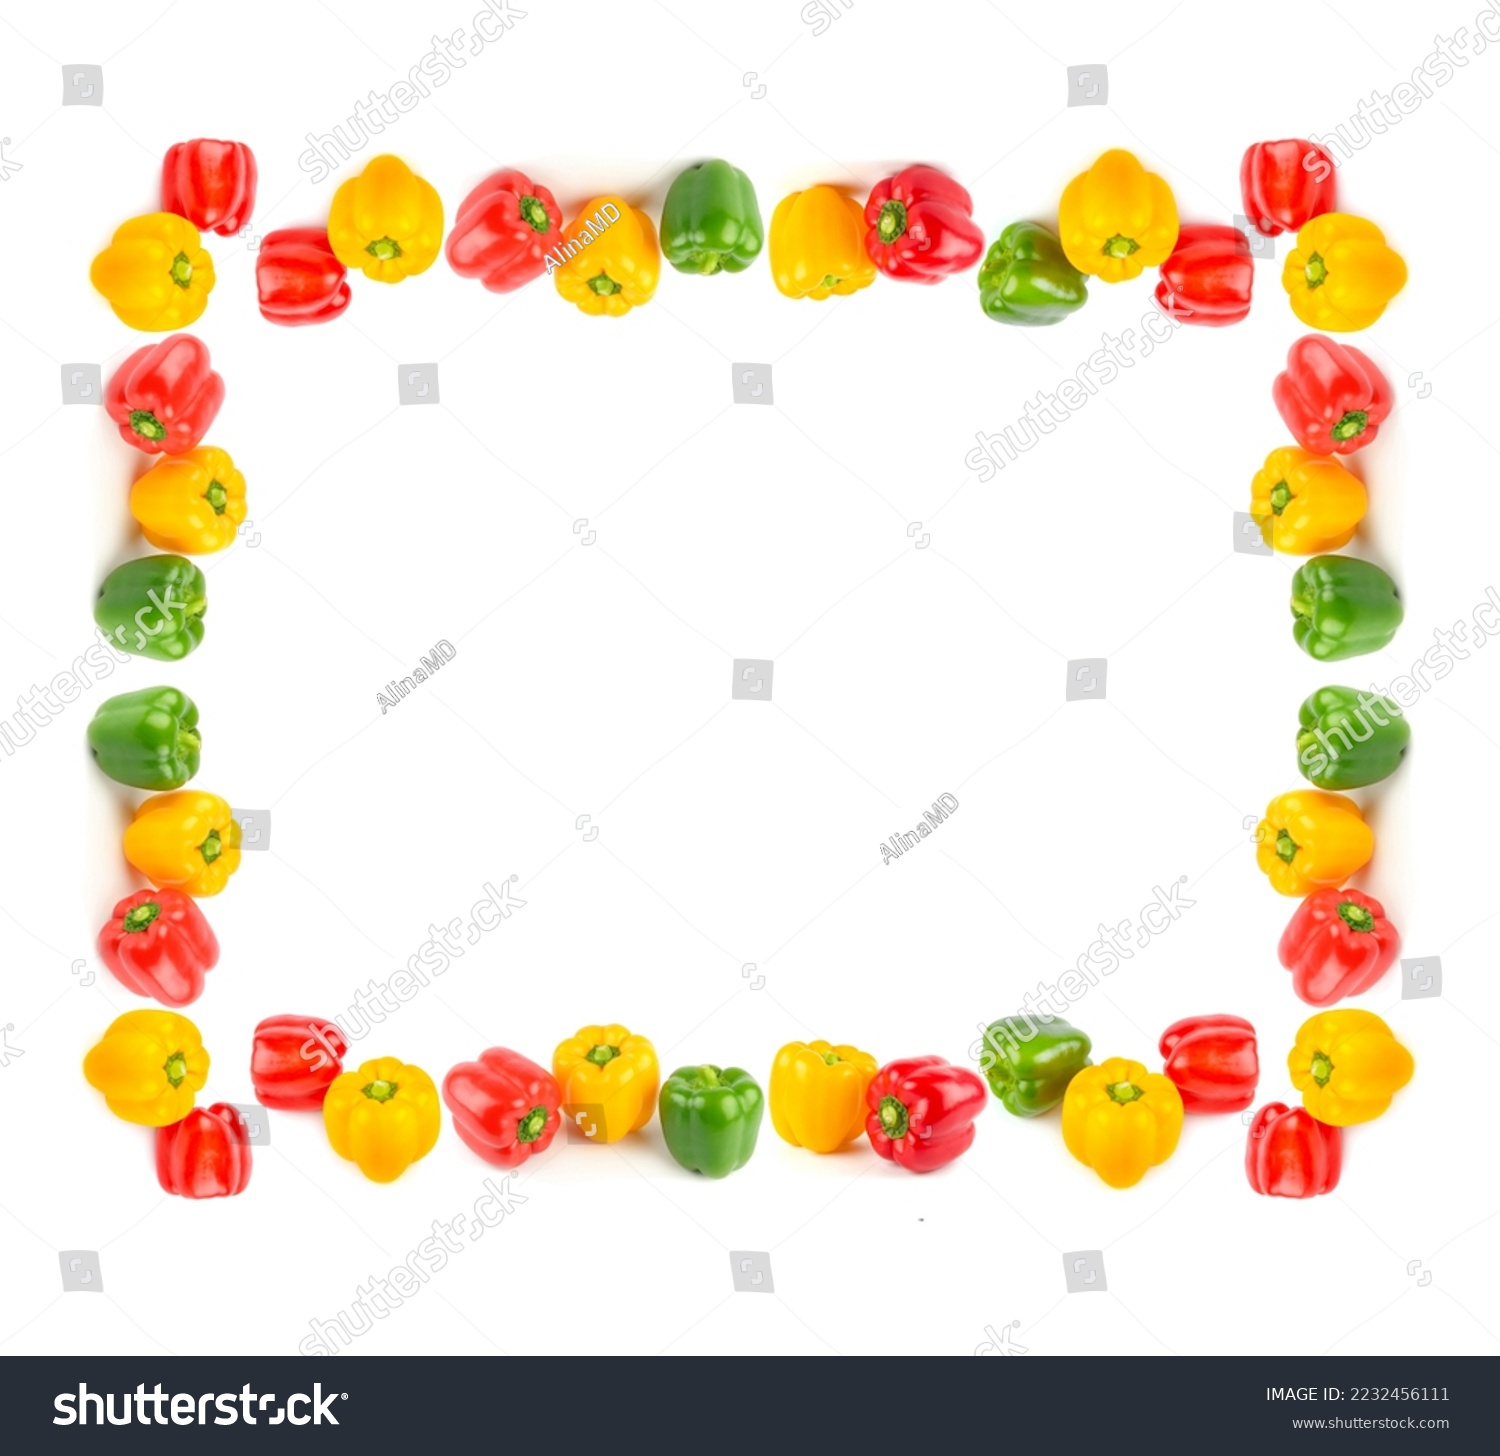 Set of sweet peppers isolated on white background. Collage. frame with empty space for text. #2232456111